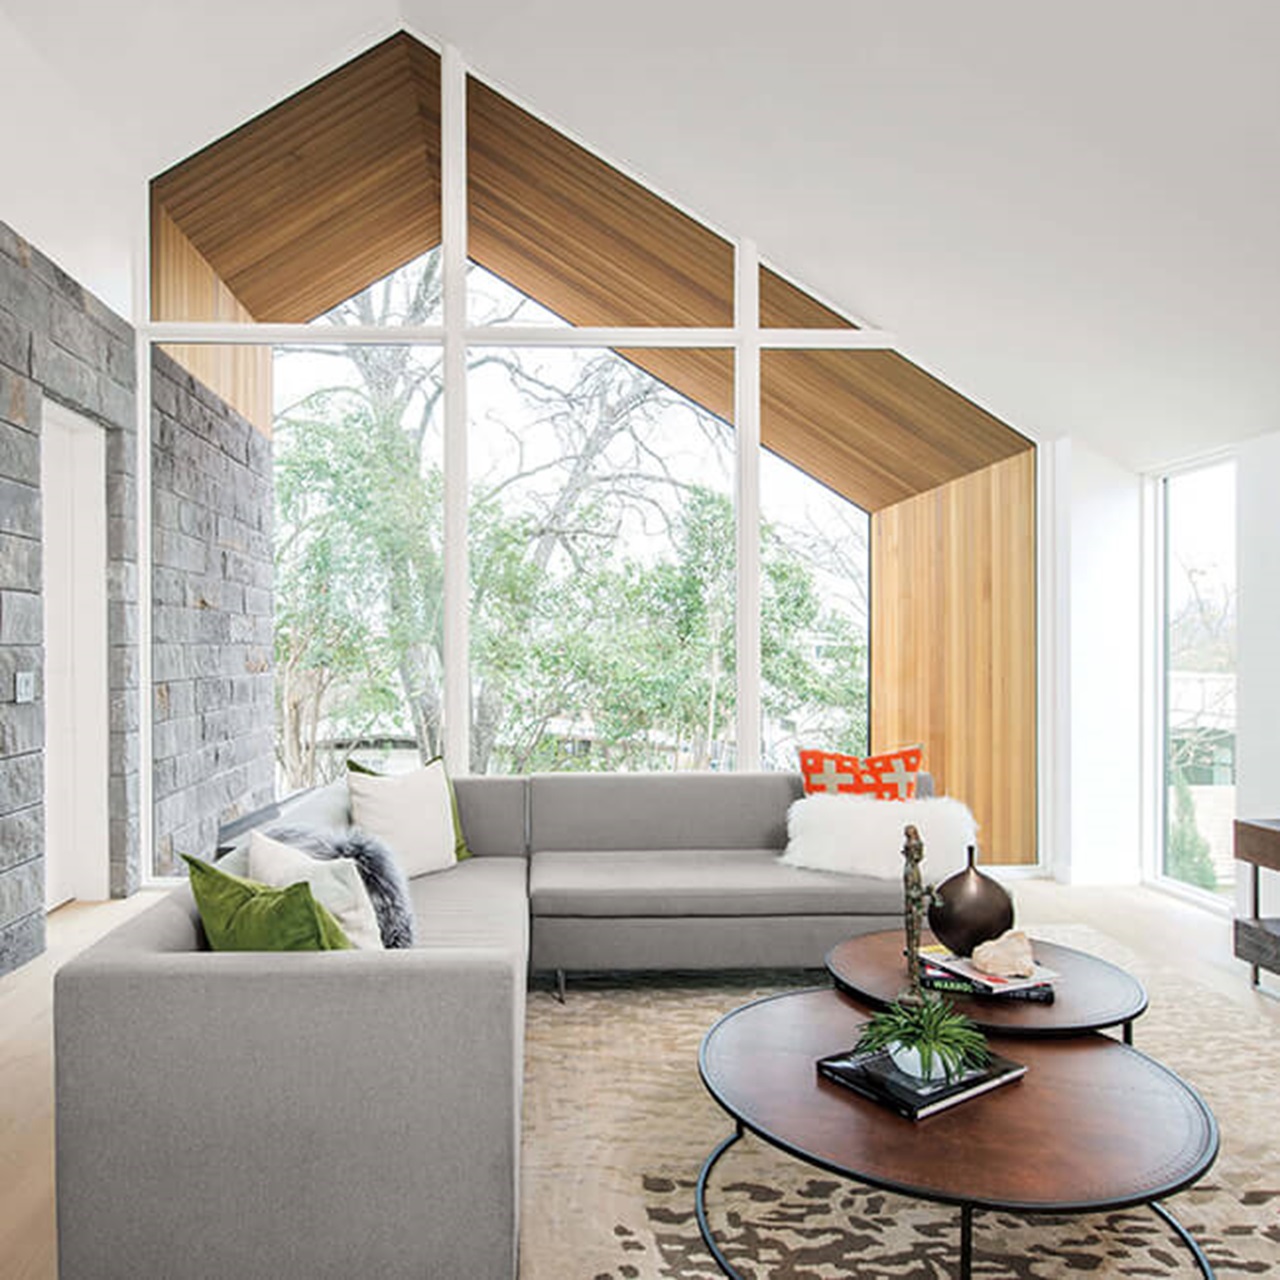 Interior View Of Contemporary Home With Ultimate Specialty Shape Windows